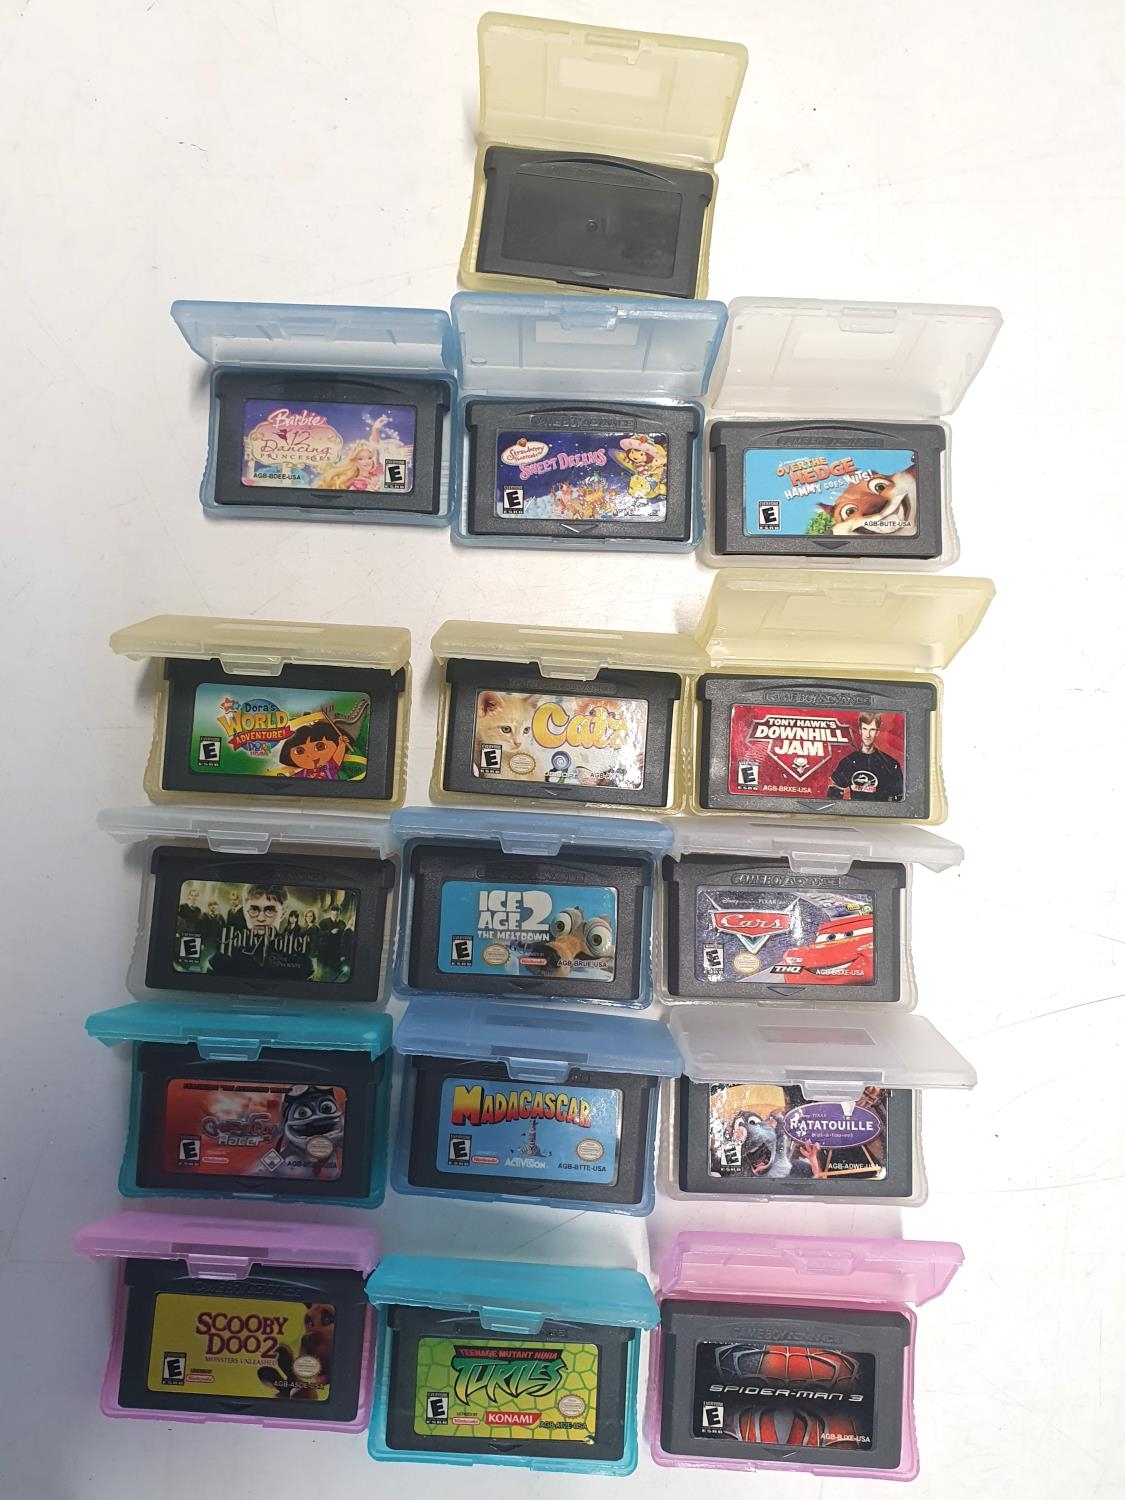 A job lot of Nintendo Gameboy Advance games mainly movie francises